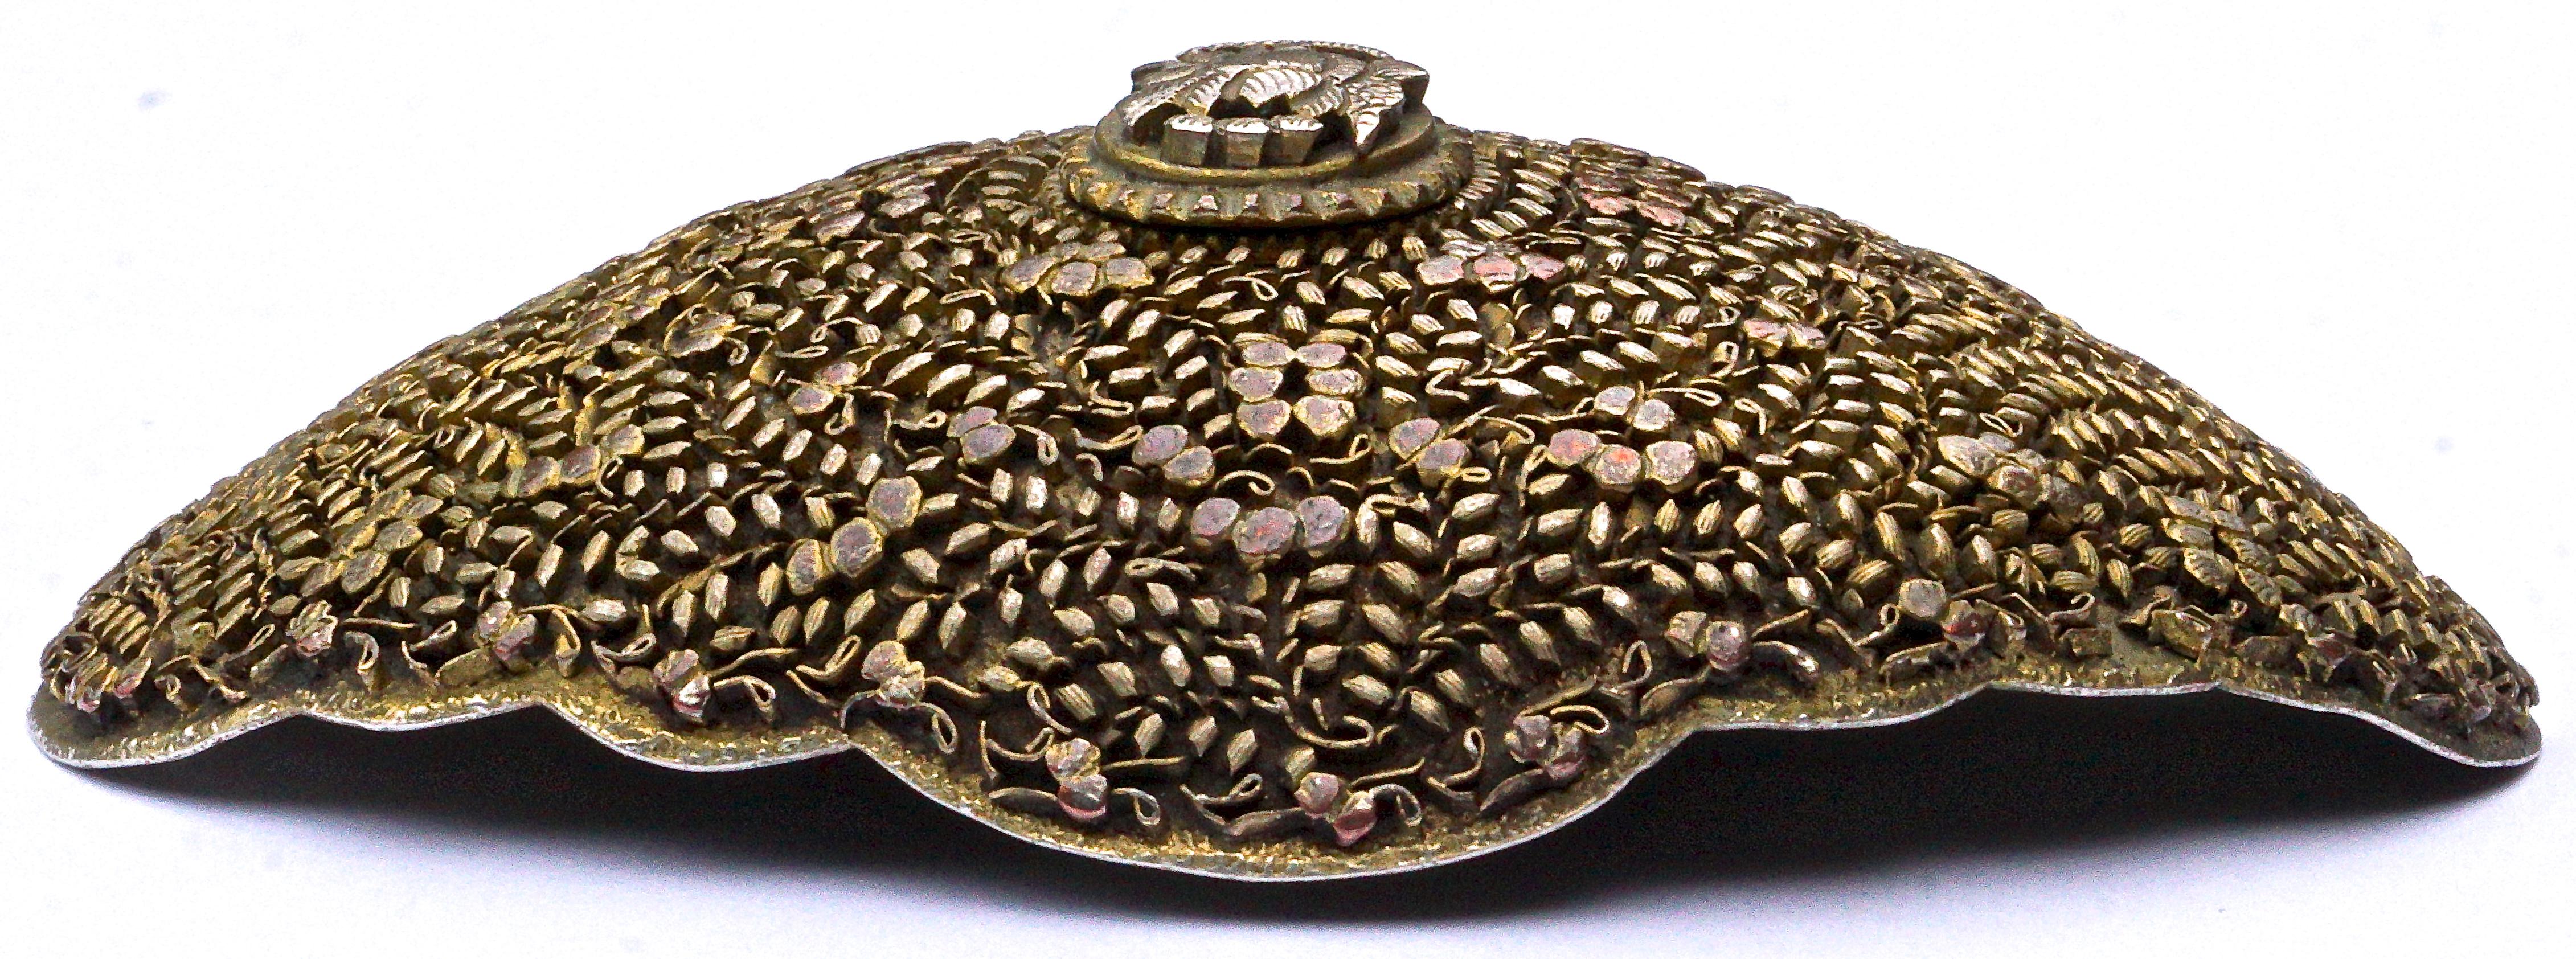 Fine antique Peranakan Chinese metal belt buckle featuring lovely intricate flower and leaf decoration. The buckle is domed with scalloped edges, and measures 10.6cm, 4.17 inches, by 7.4cm, 2.9 inches. The centre is a little loose, but secure. We